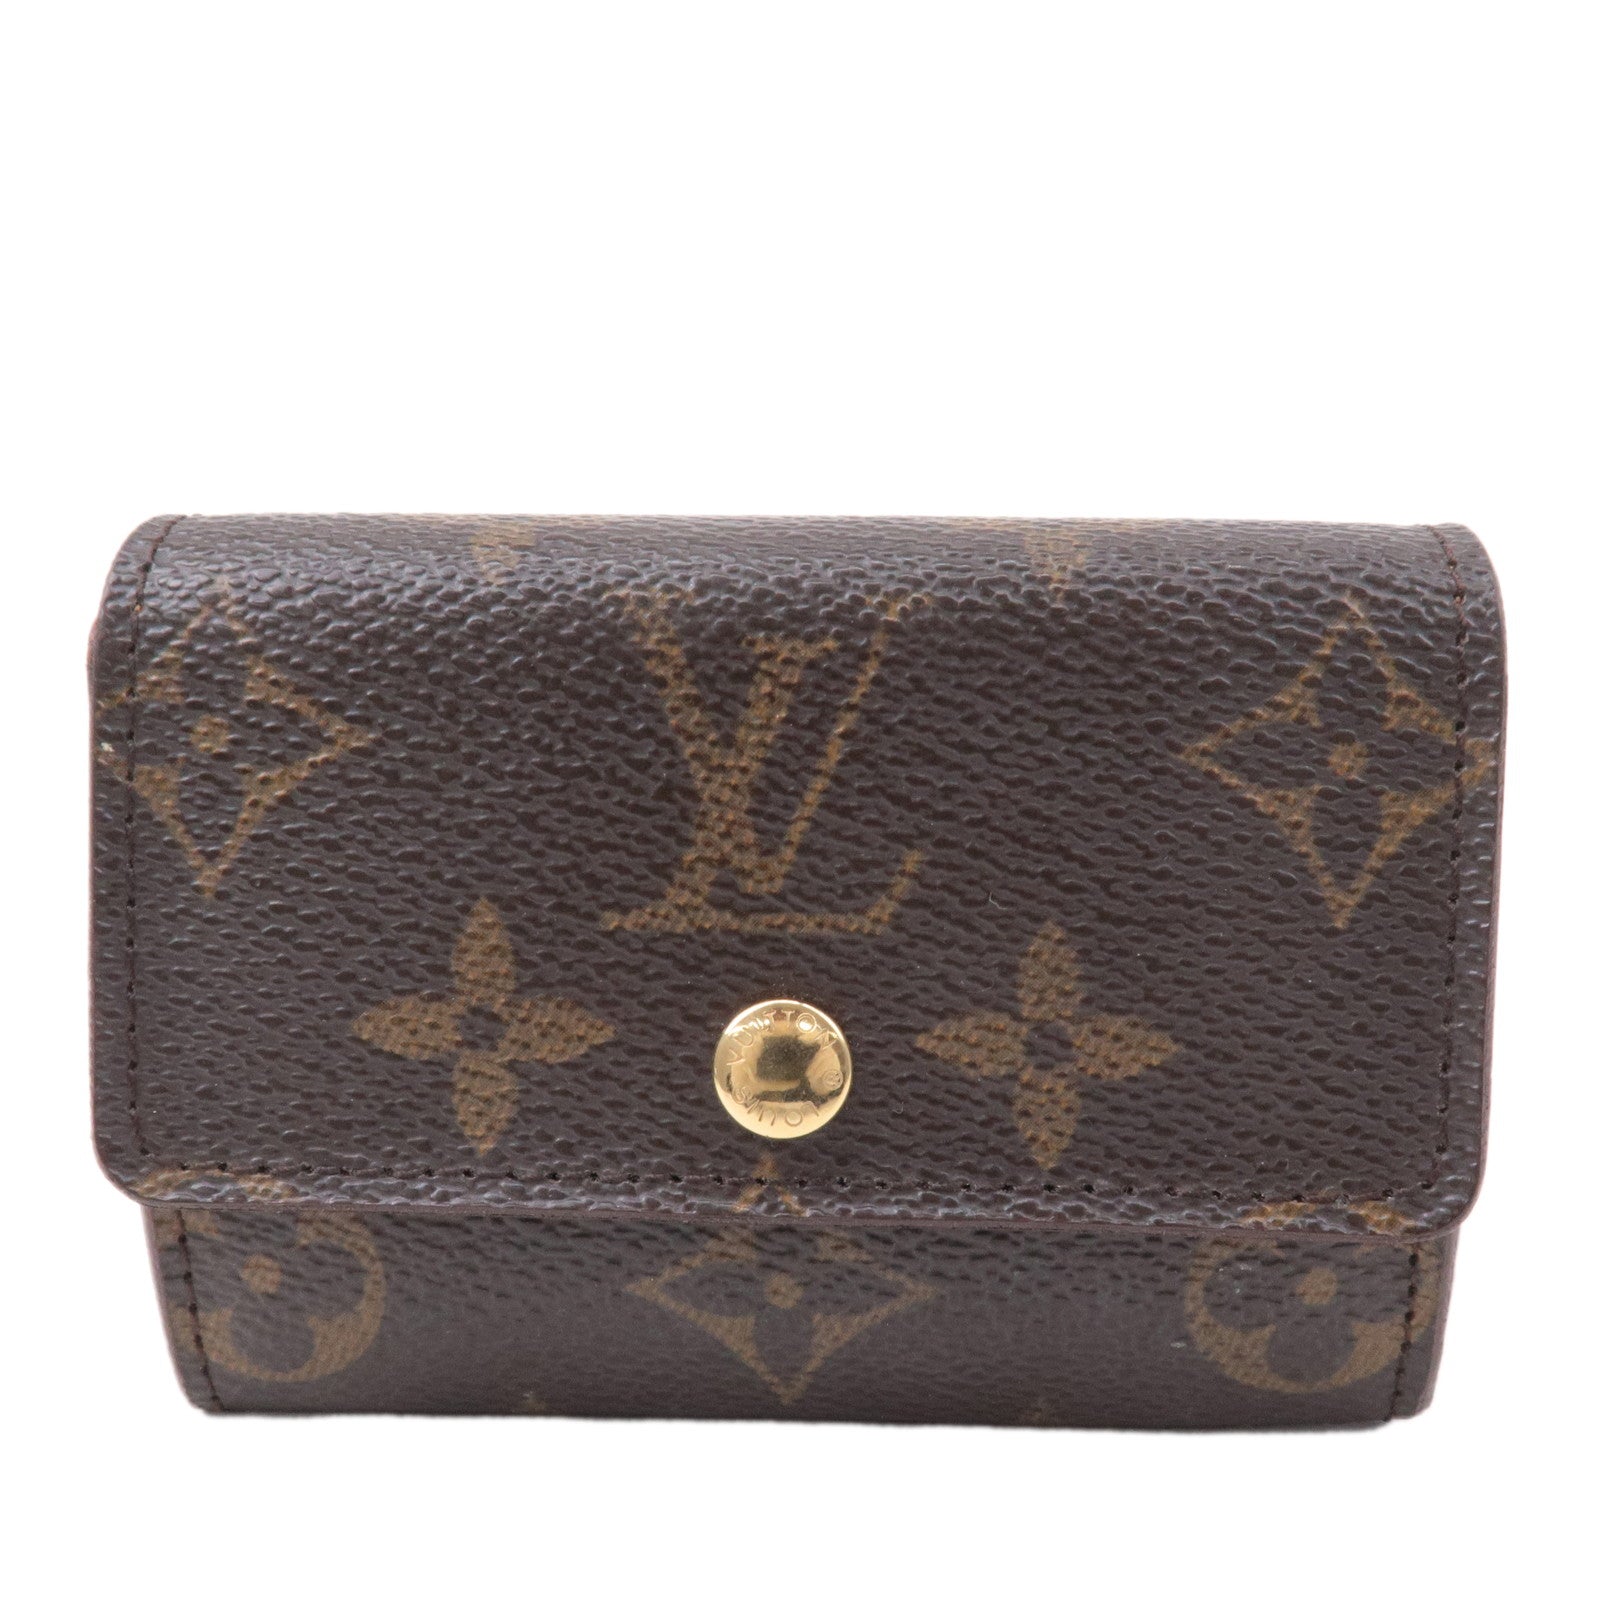 lv wallet case brown leather